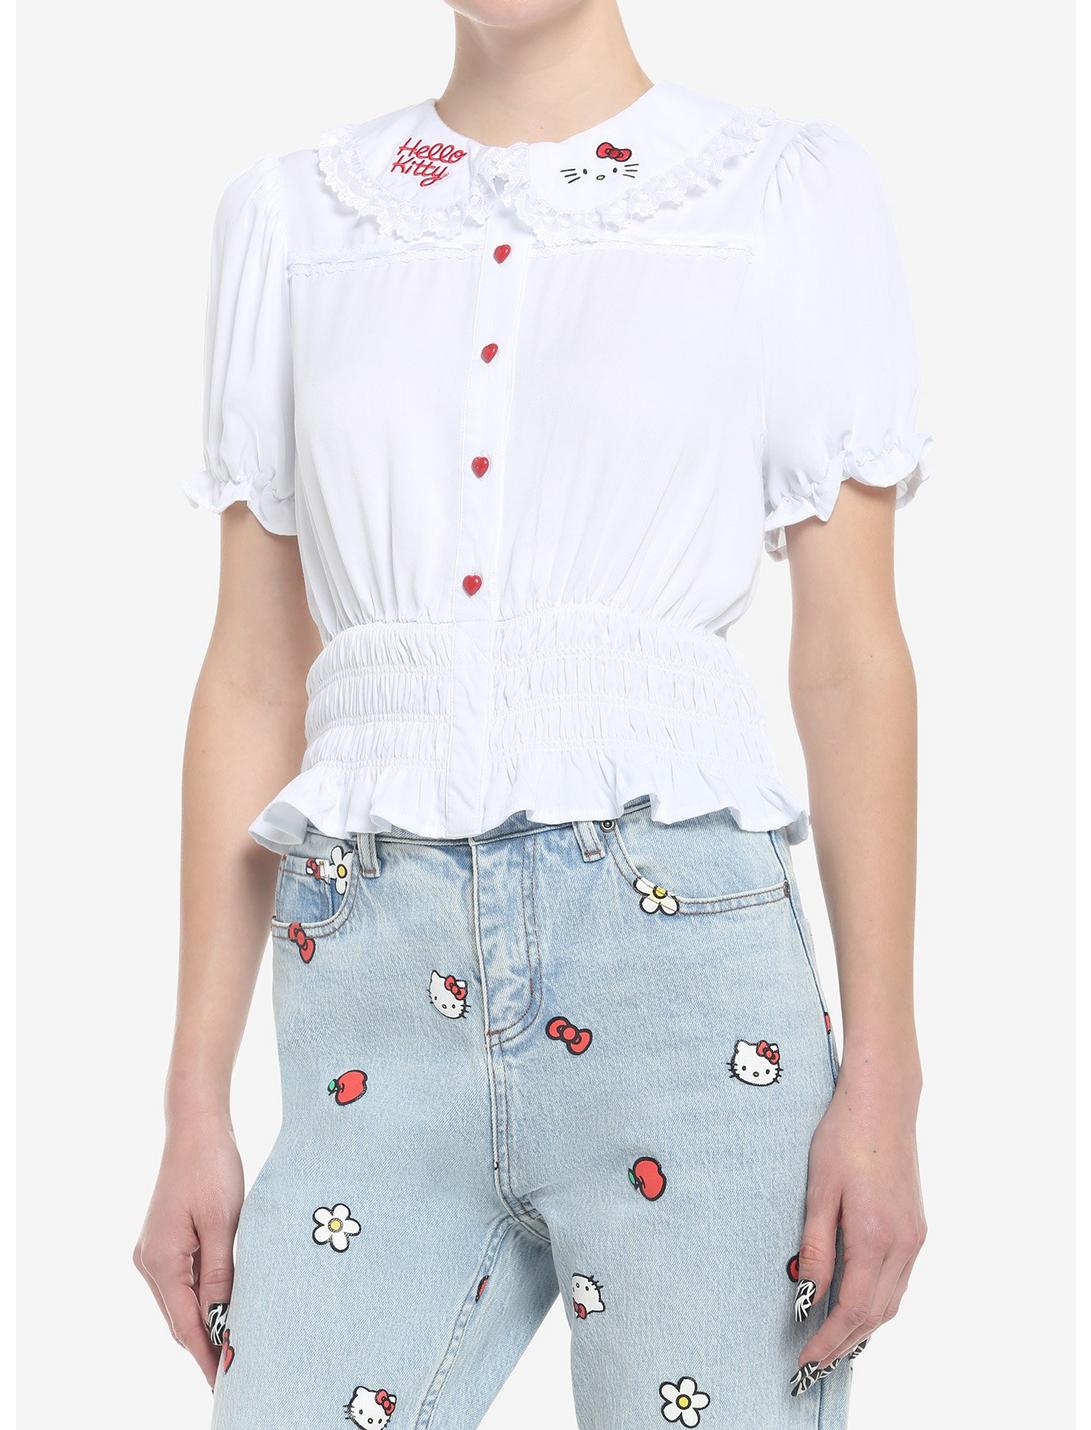 Hello Kitty Lace Girls Woven Button-Up Top, MULTI, hi-res